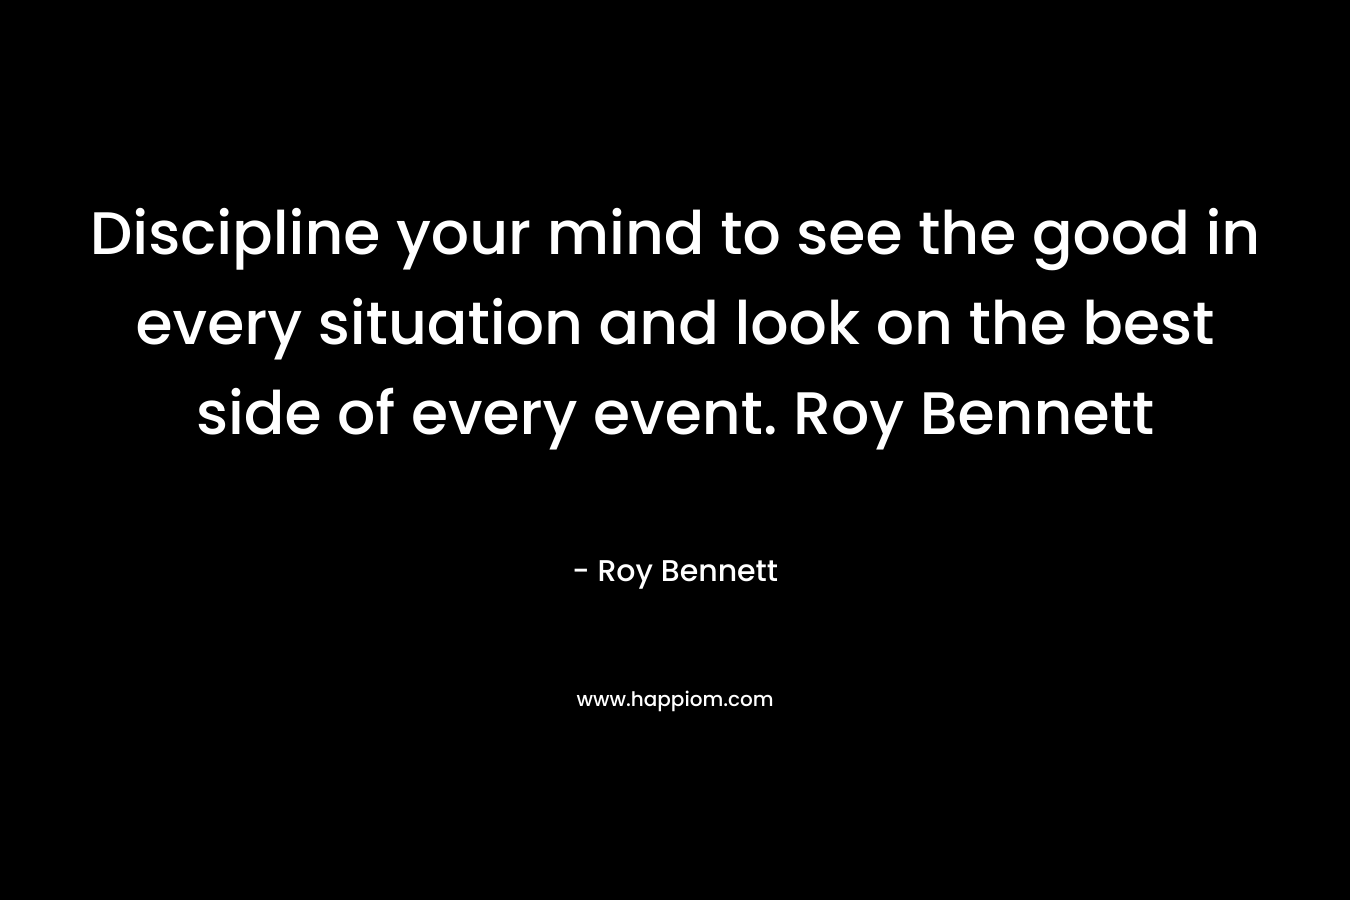 Discipline your mind to see the good in every situation and look on the best side of every event. Roy Bennett